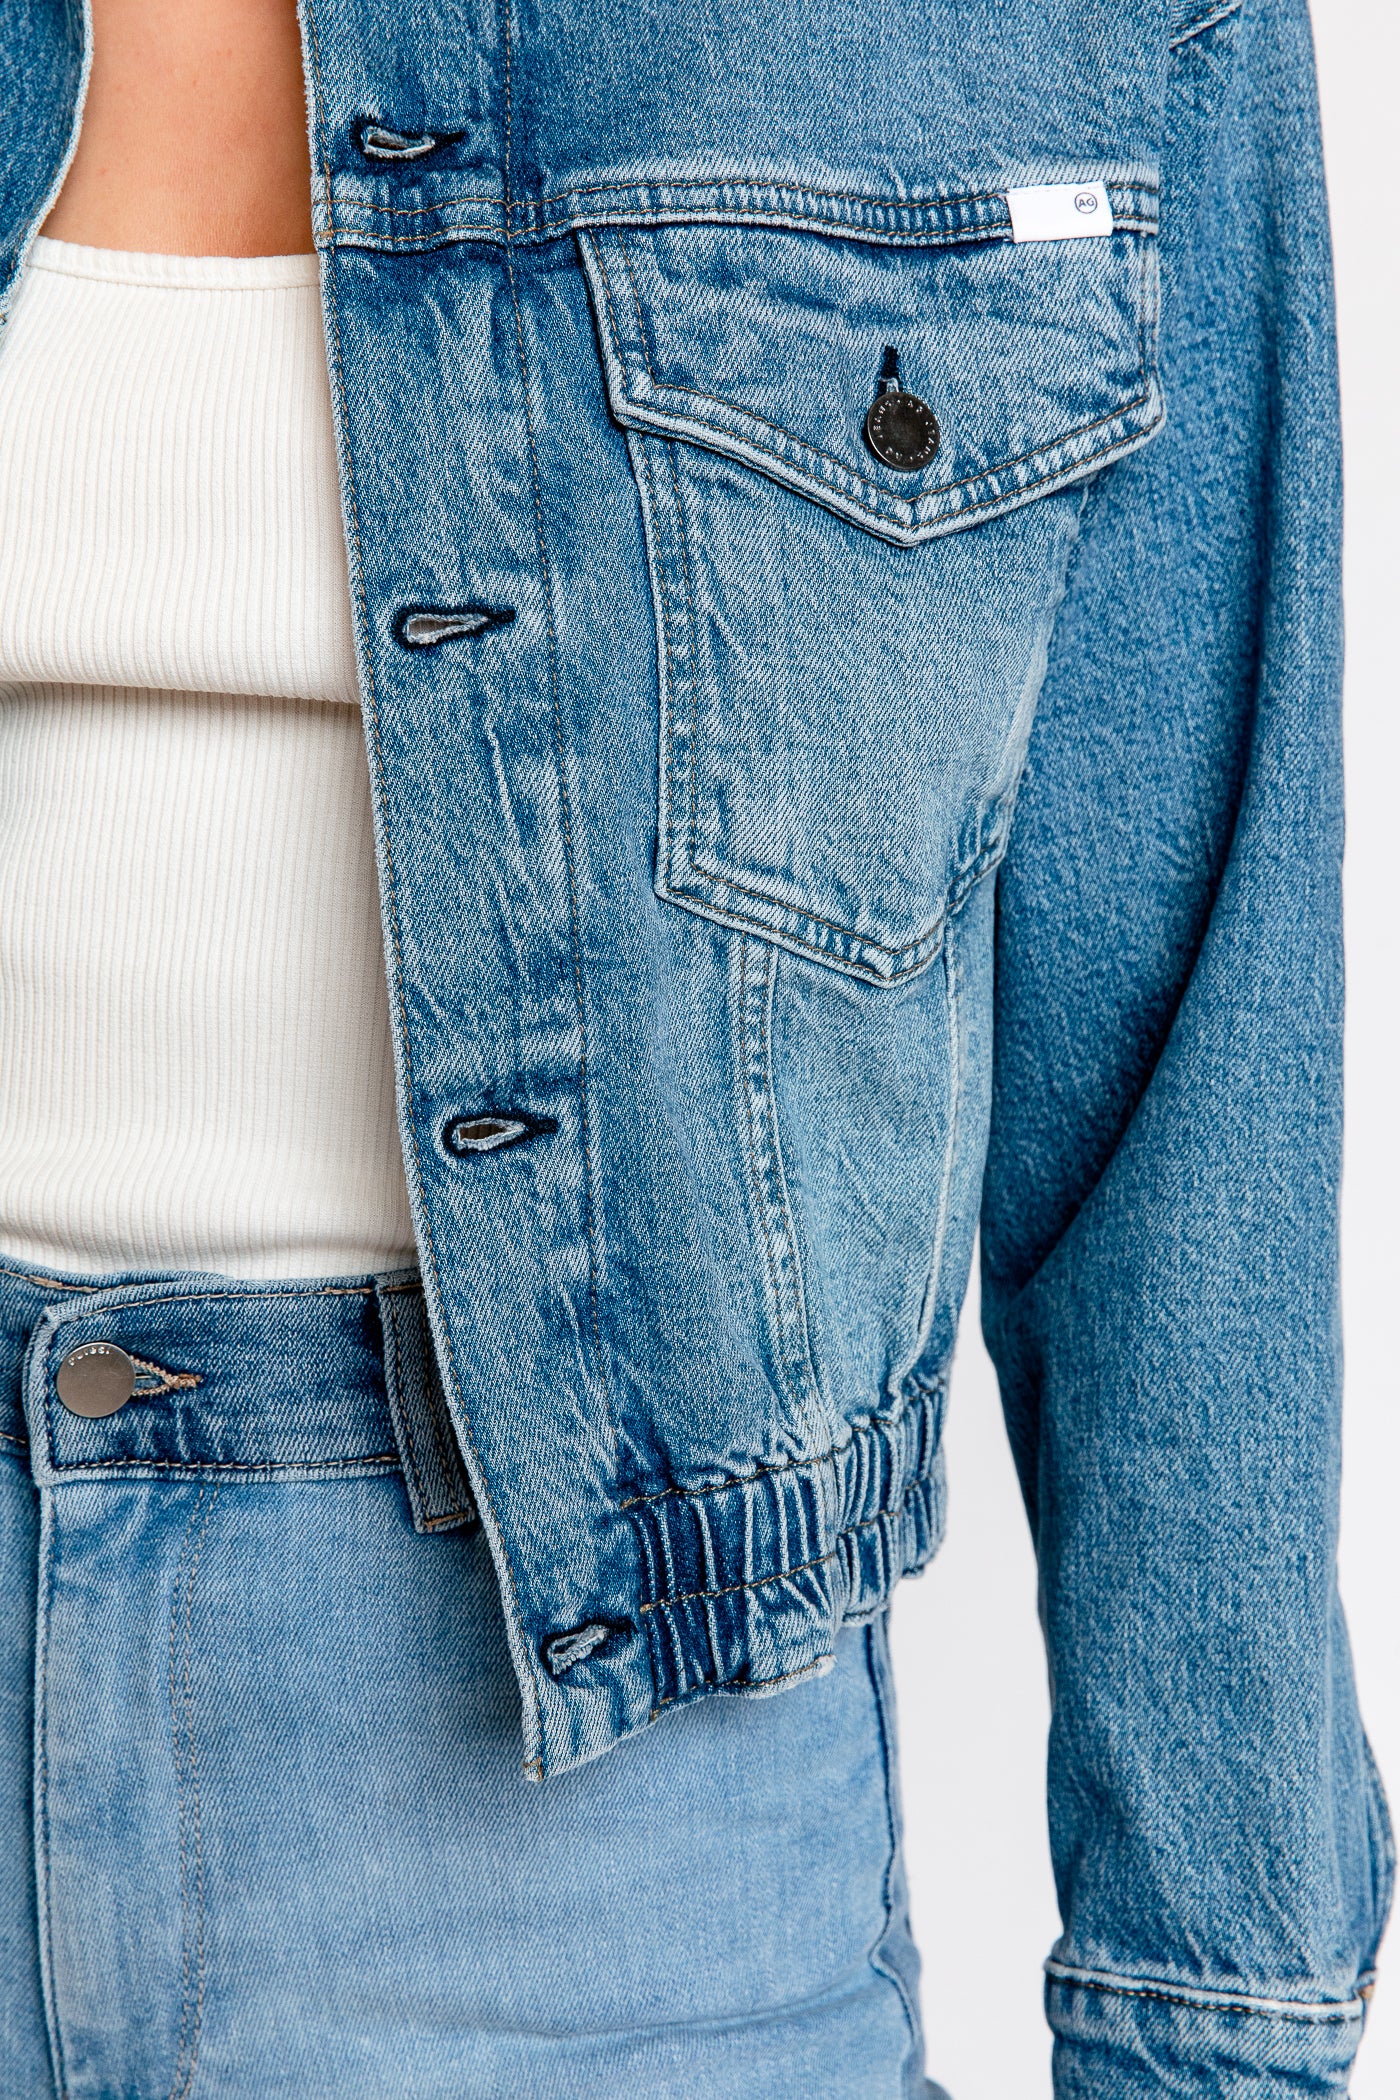 AG Jeans Cropped Arllow Jacket